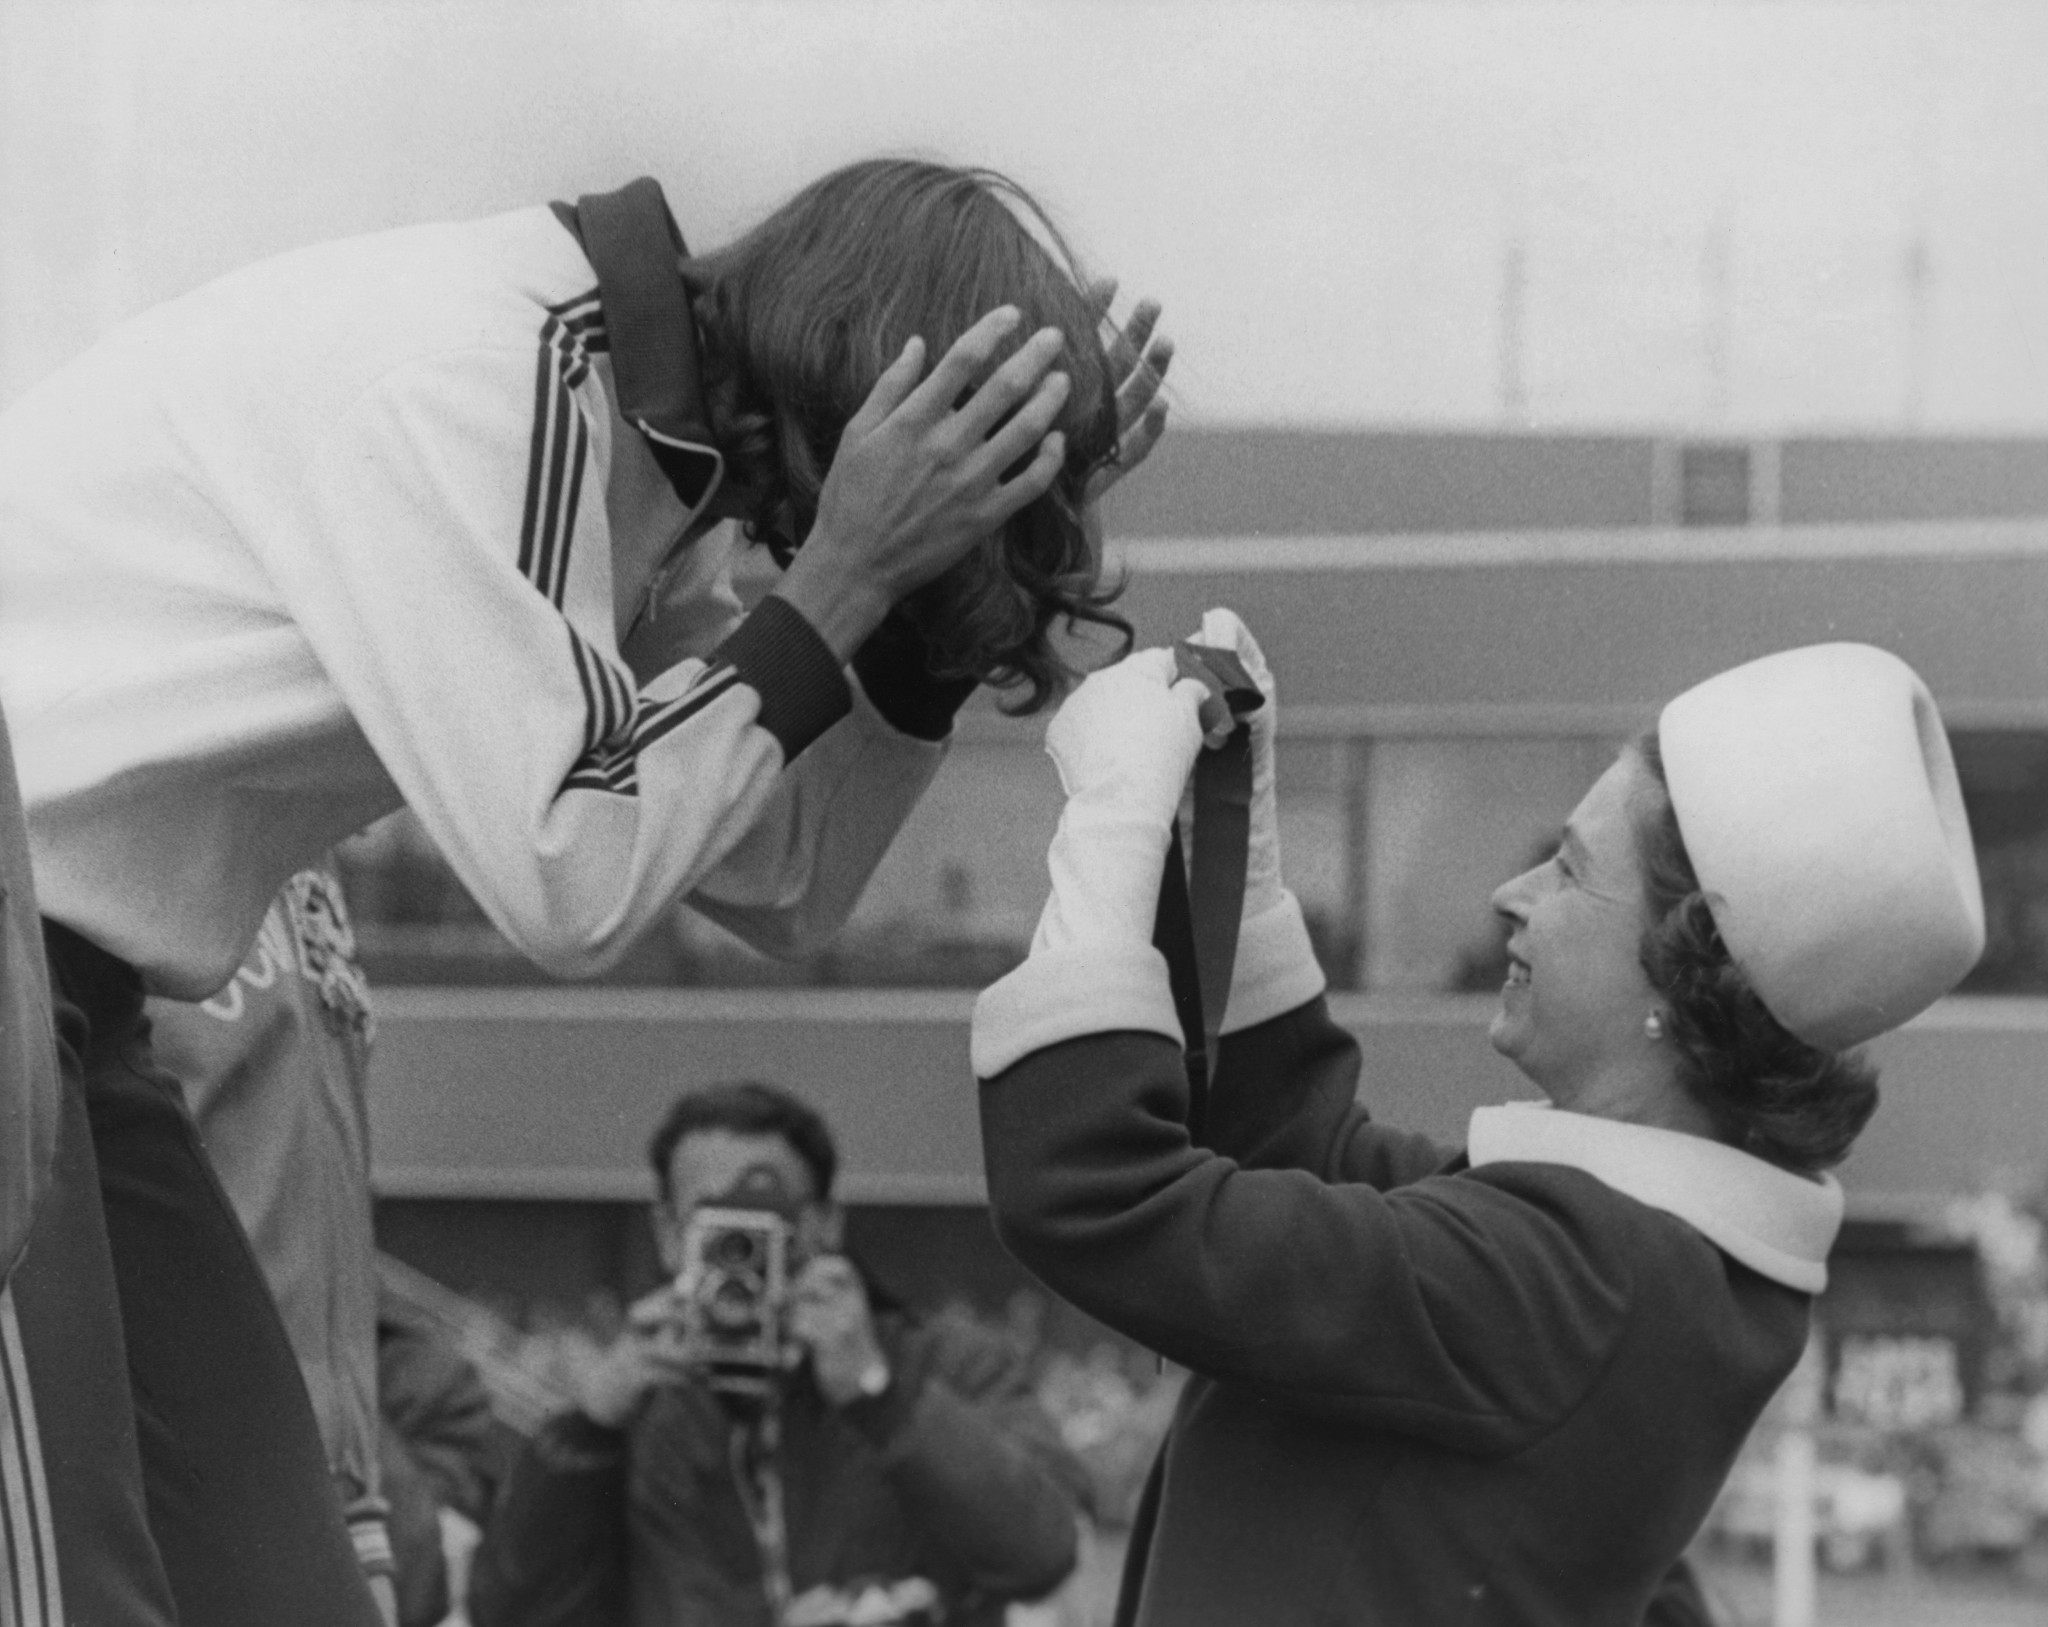 Queen Elizabeth II gets the ribbon entangled in the hair of Debbie Brill as she presents her with the high jump gold medal at Edinburgh 1970. Brill had earlier been drunk at The Queen's reception ©Getty Images